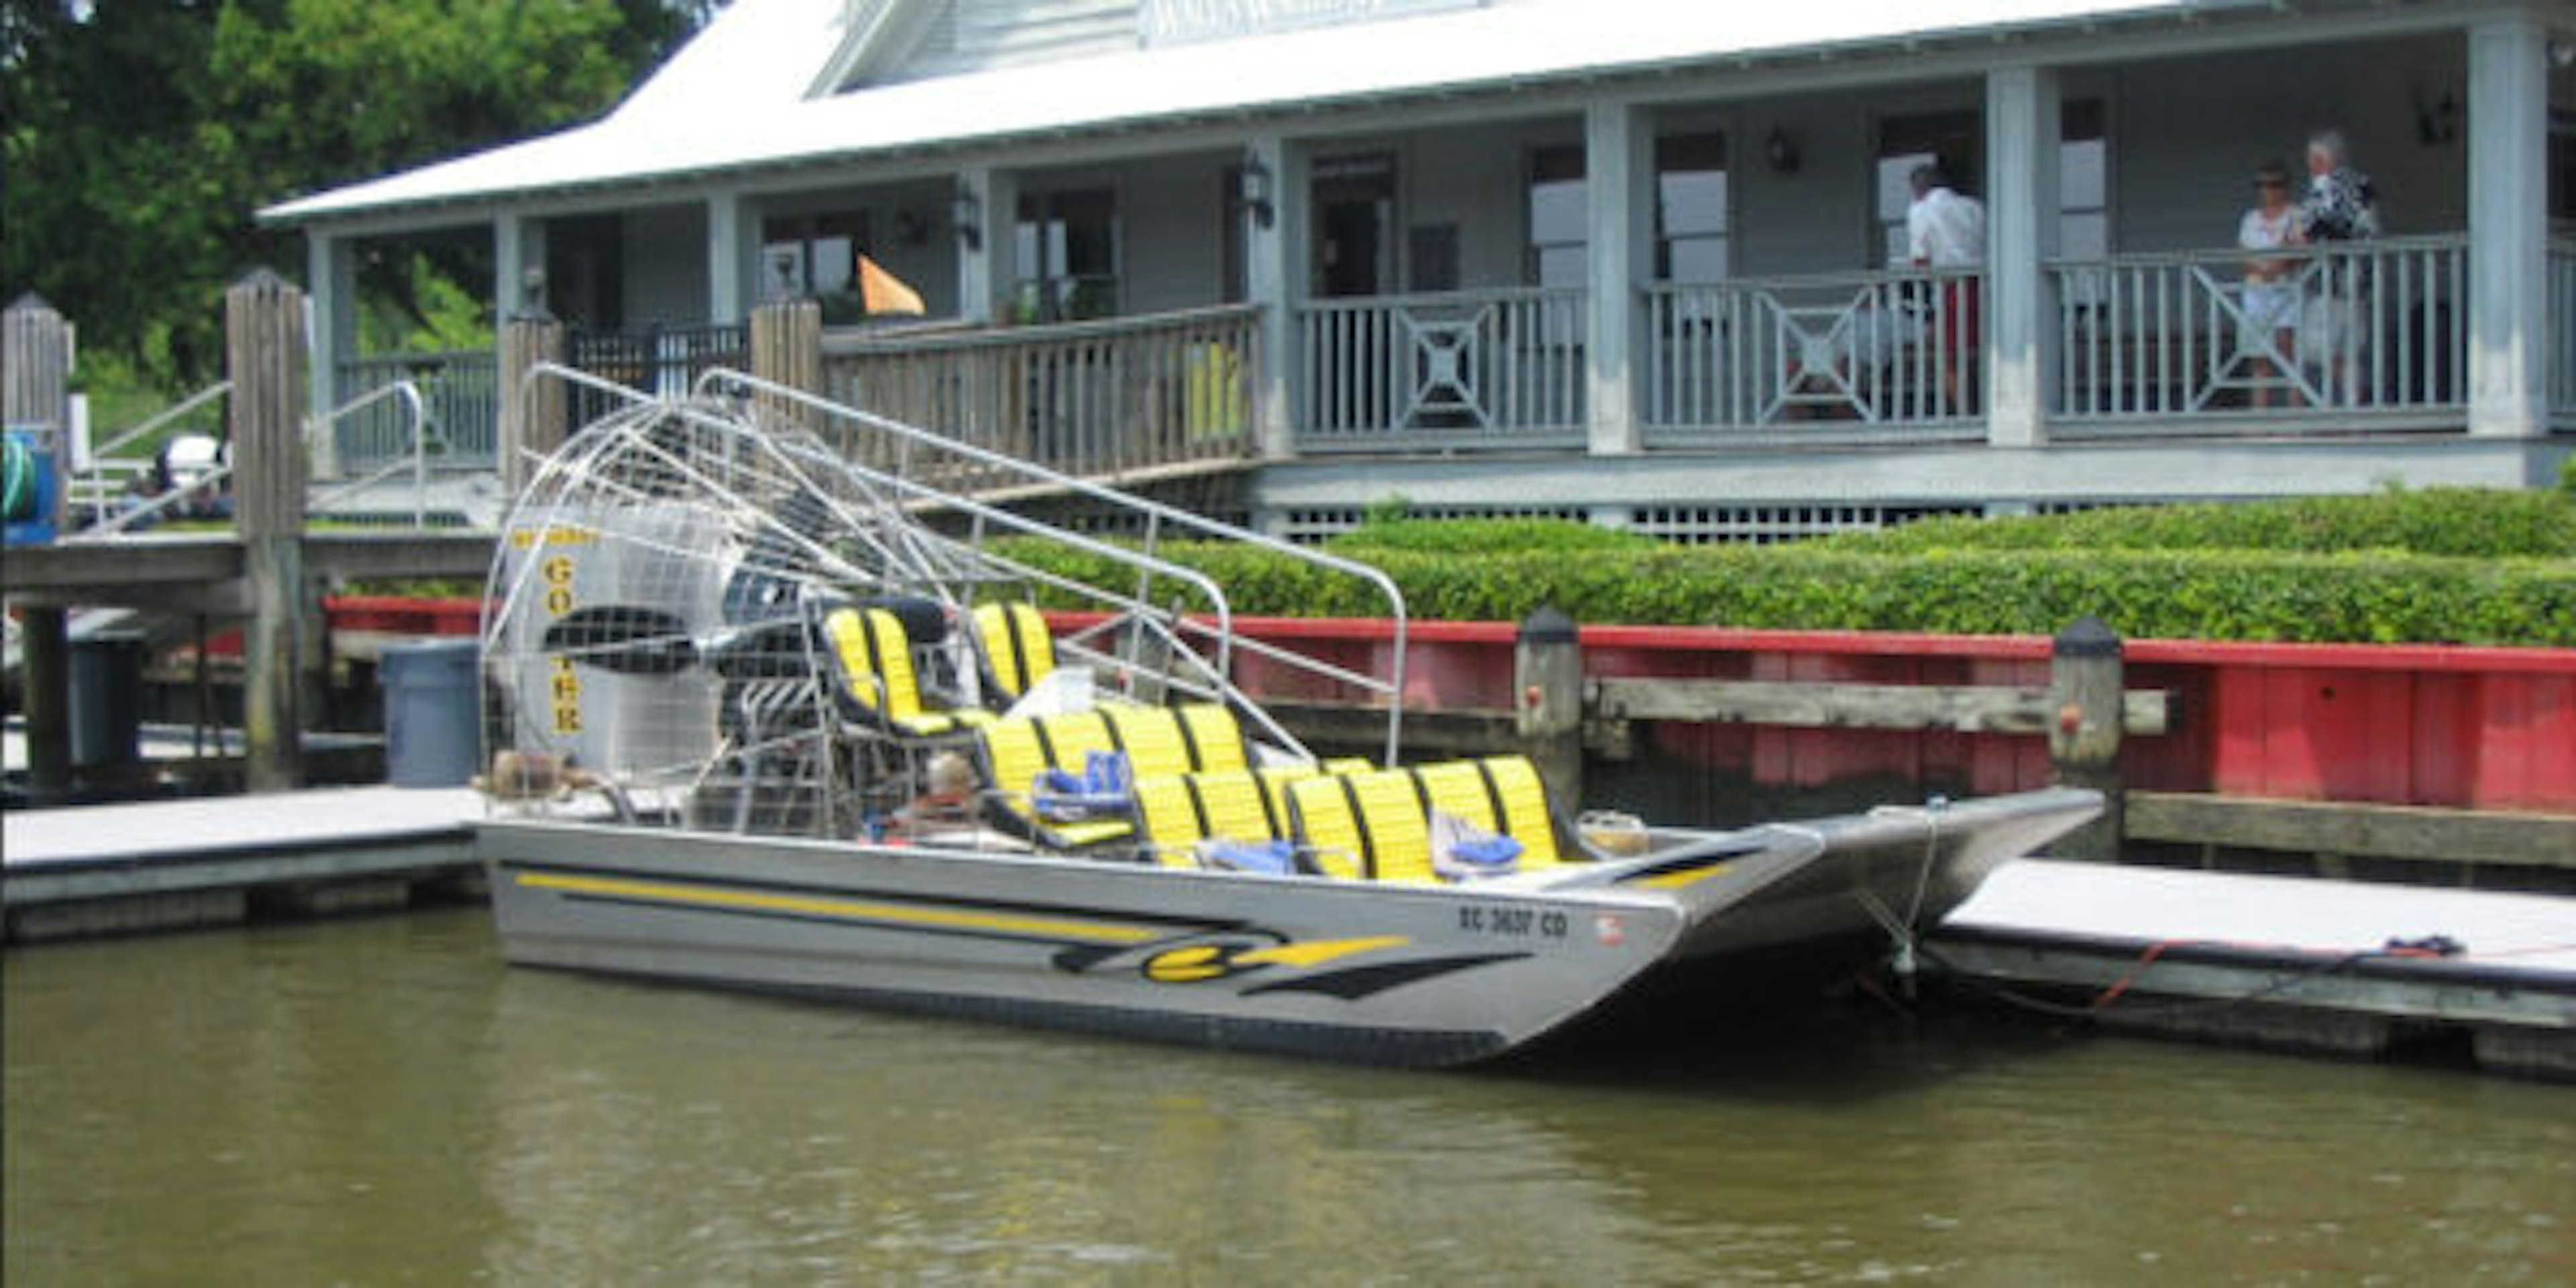 $2.00 OFF Airboat Rides